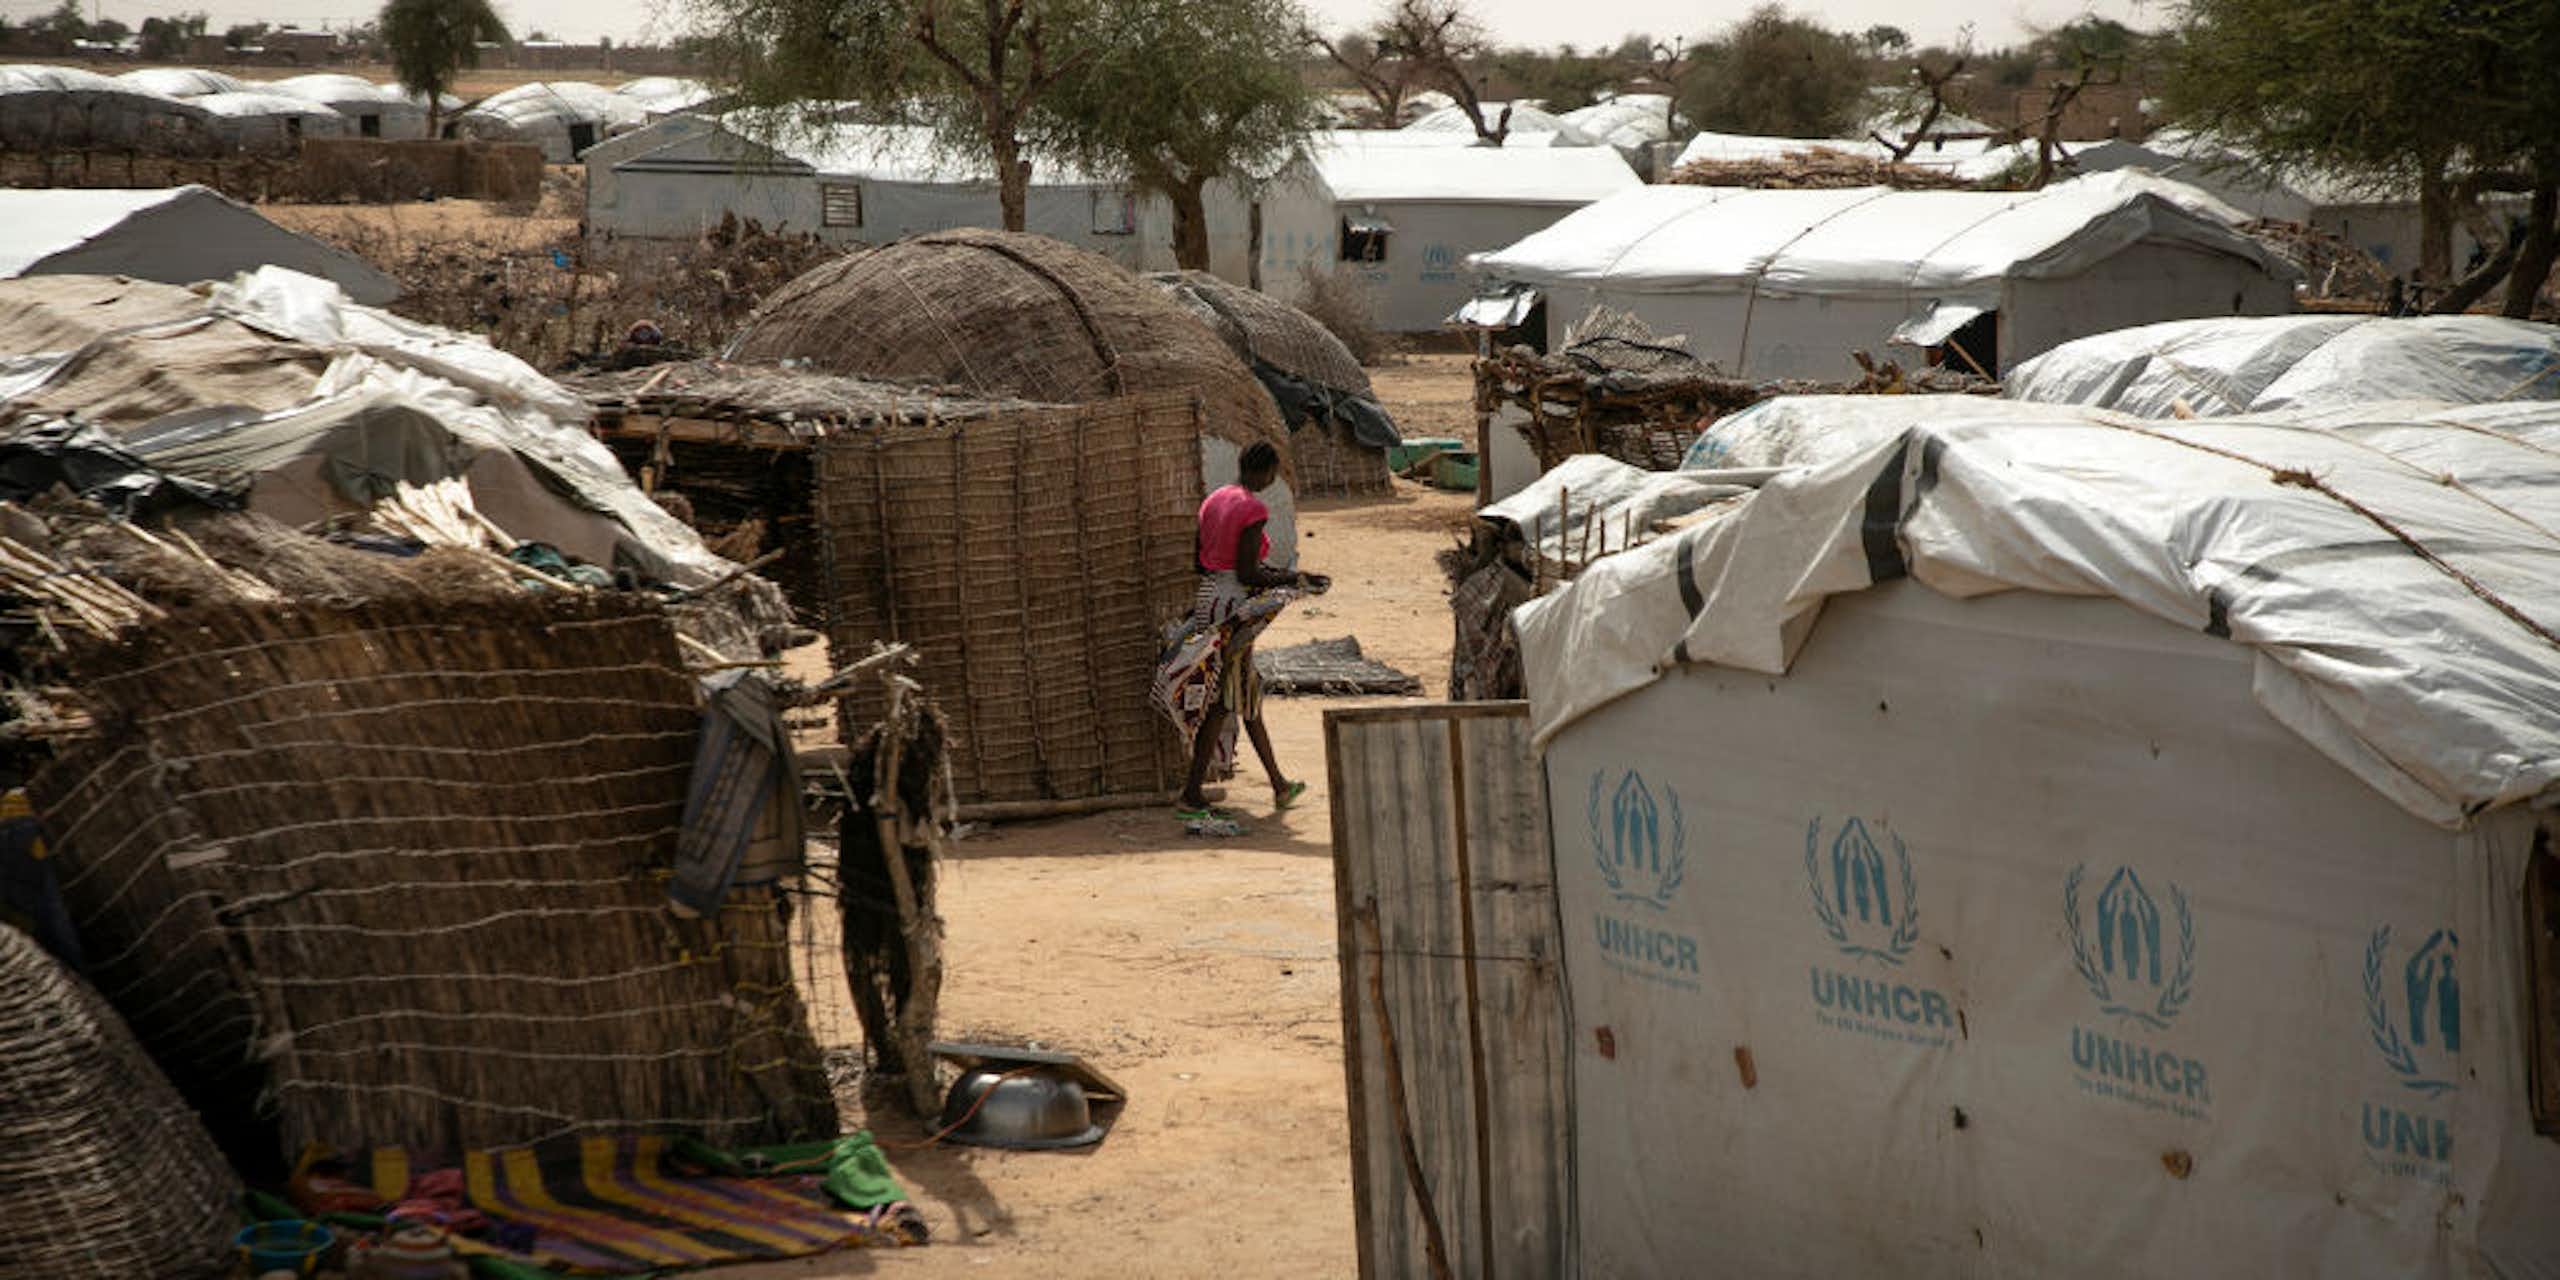 A woman walking between makeshift shelters and tents made with reeds and canvas.